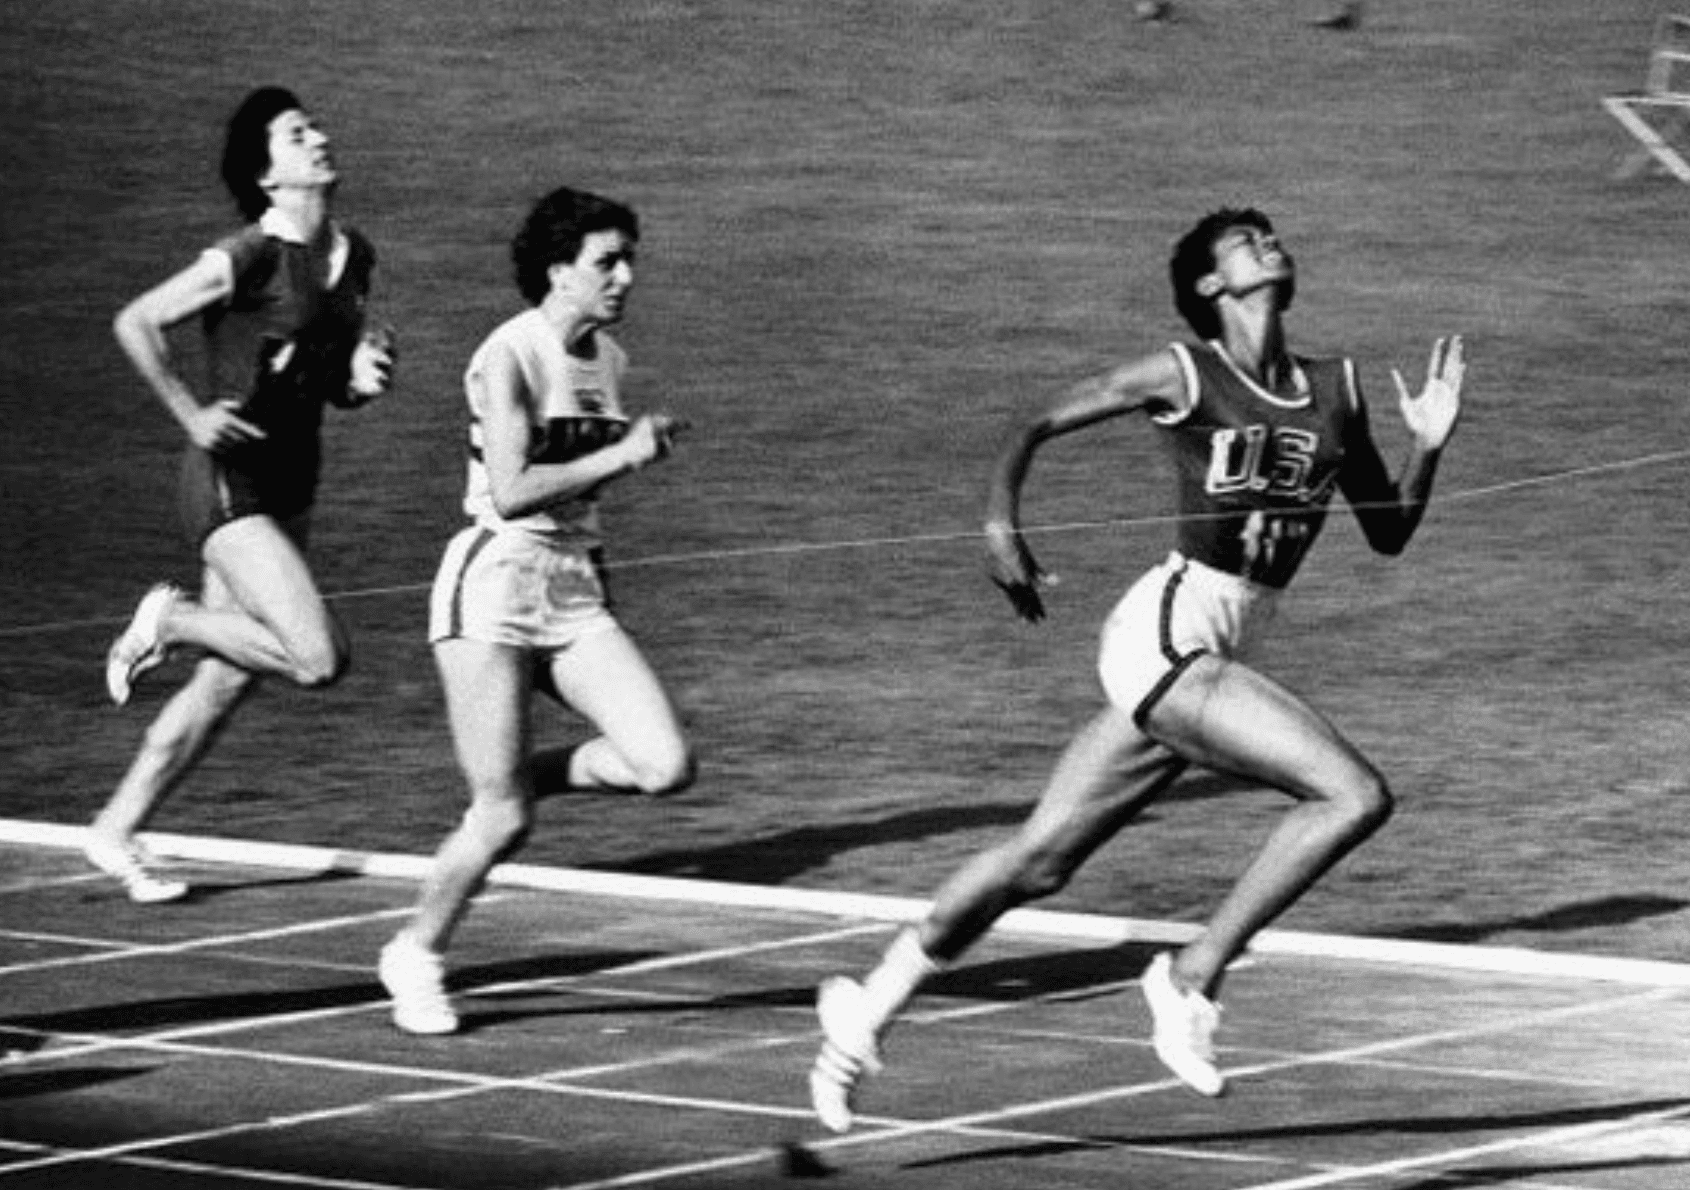 Black and white photo of three women running on a race track with Wilma Rudolph in front.